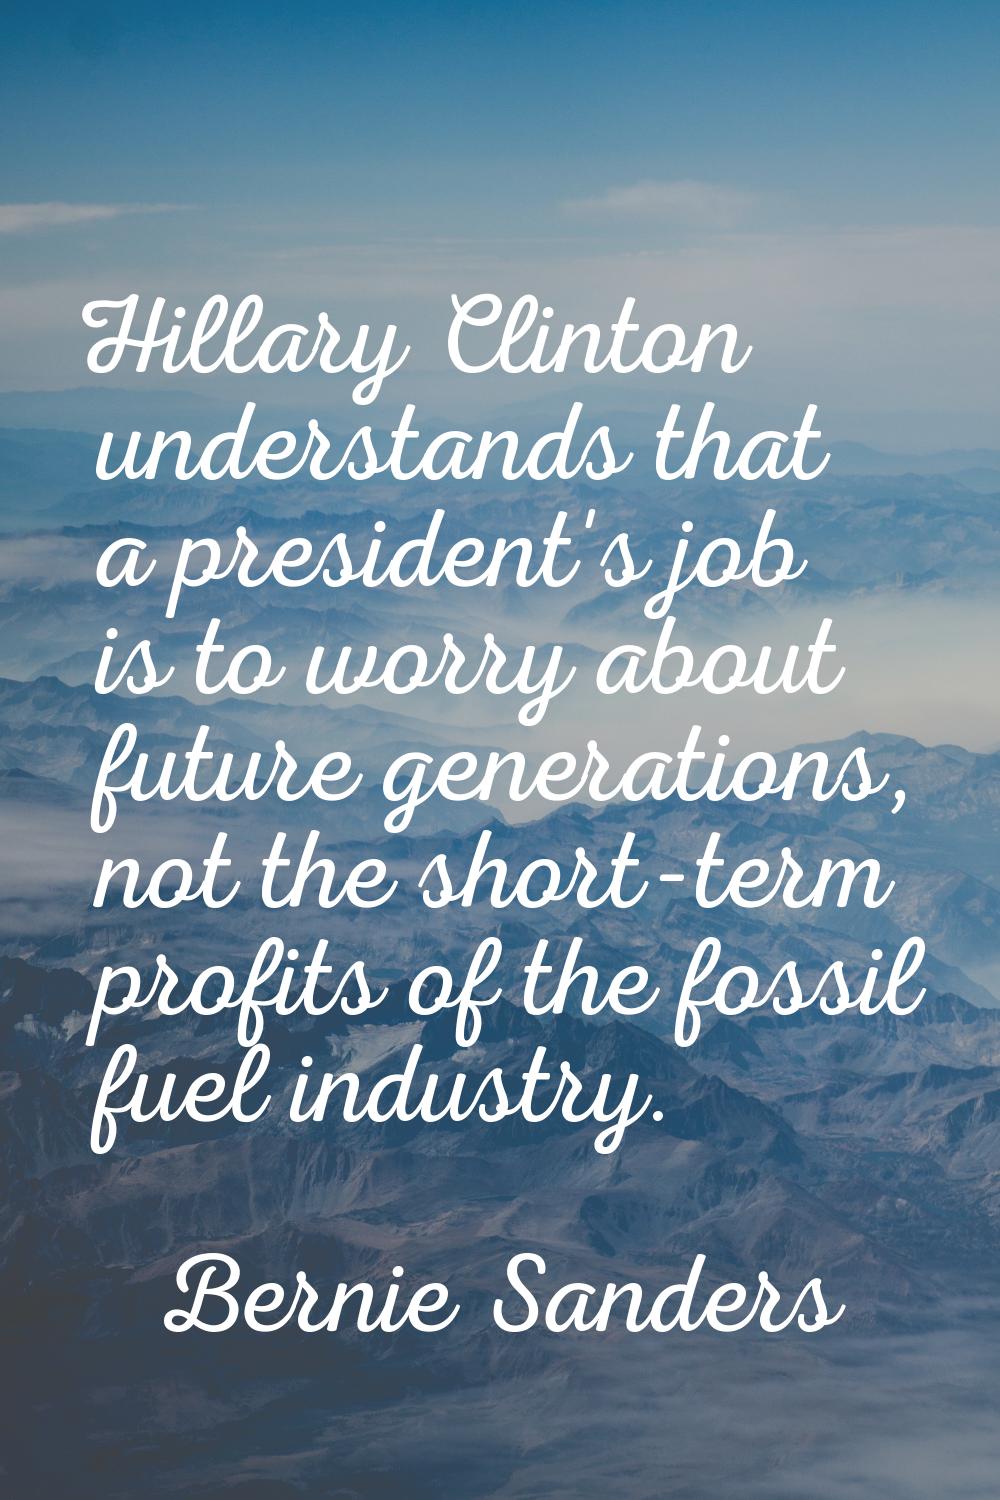 Hillary Clinton understands that a president's job is to worry about future generations, not the sh